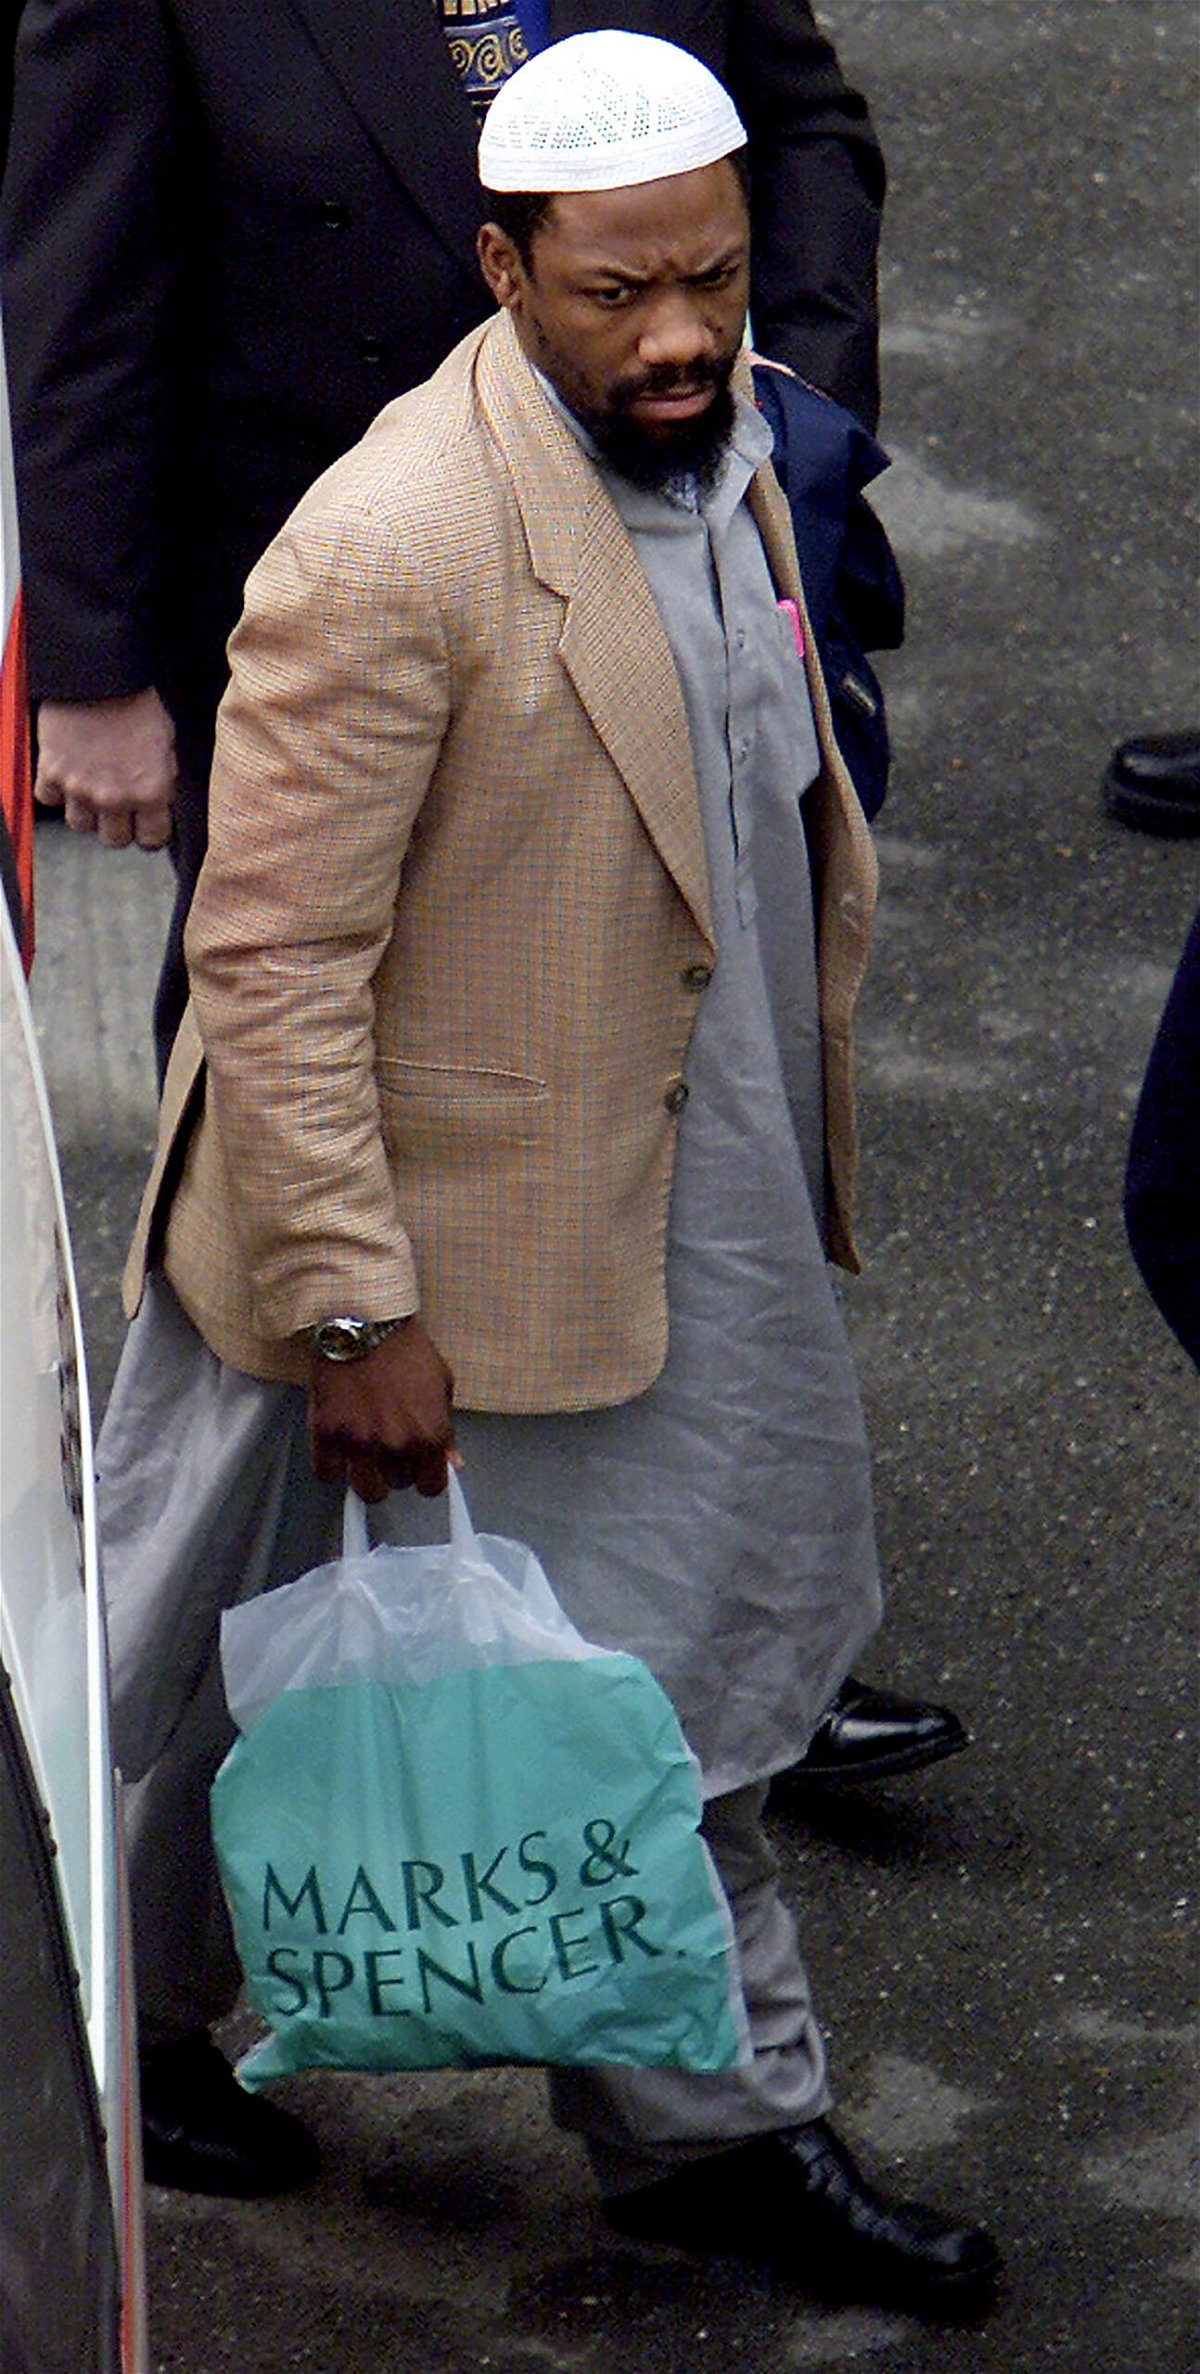 <i>Ian Waldie/Reuters/FILE</i><br/>Abdullah el-Faisal arrives at Bow Sreet Magistrates Court in London in February 2002.